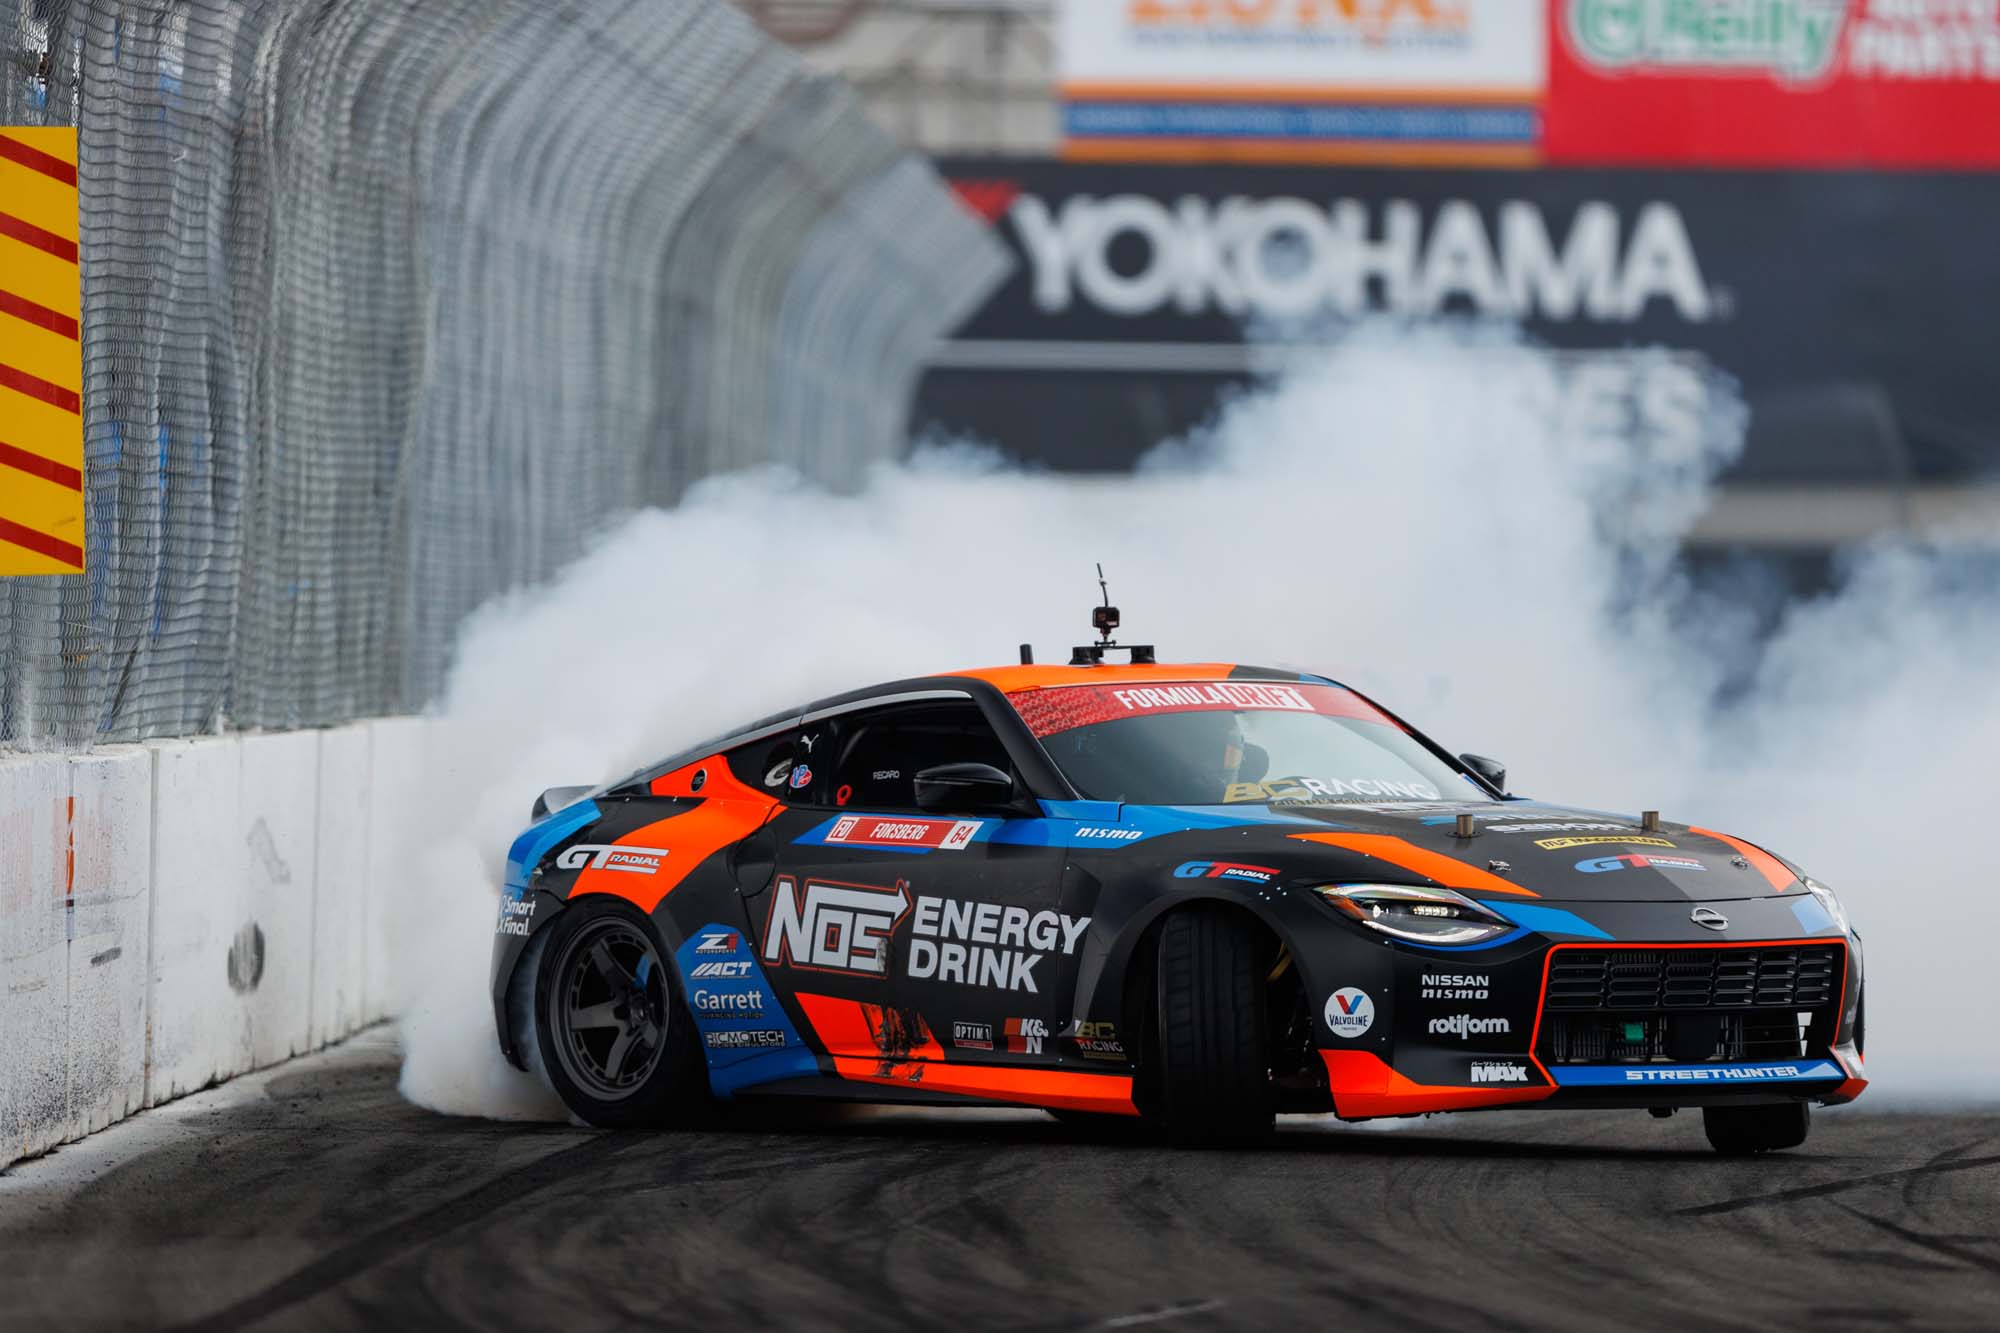 Three-time Formula Drift champion Chris Forsberg’s latest drift car, a 2023 Nissan Z modified to produce an incredible 1,300 horsepower, will appear at Nissan’s booth at the 2022 Specialty Equipment Market Association (SEMA) Show. The Forsberg Racing team equipped the Nissan Z with an extensively modified VR38DETT twin-turbocharged V6 engine – as found in the Nissan GT-R – and made significant chassis and bodywork modifications to prepare the car for Formula Drift.